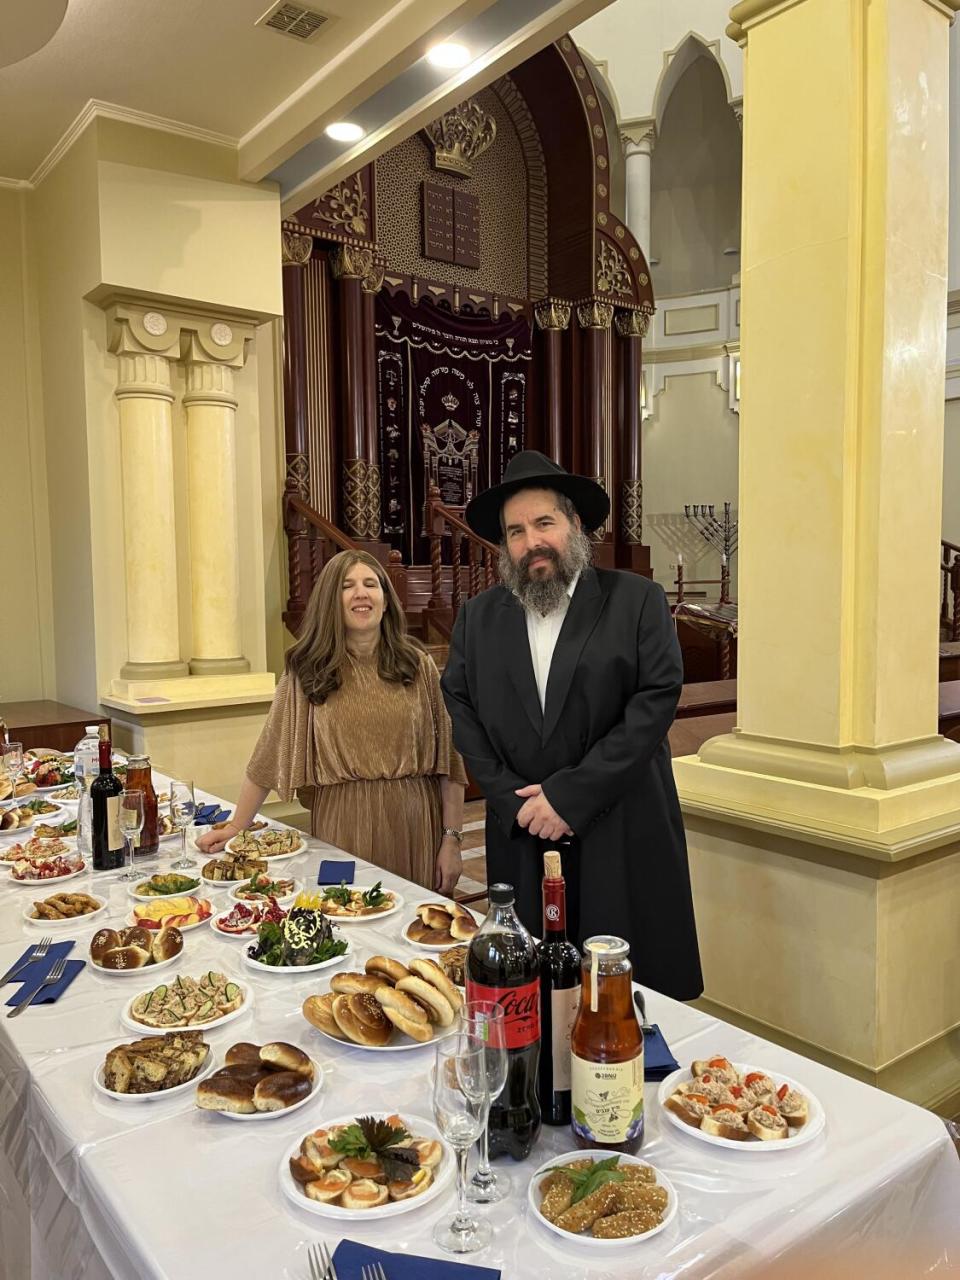 A woman in a brown dress and a bearded man in dark clothing and hat stand before a table laden with plates of food